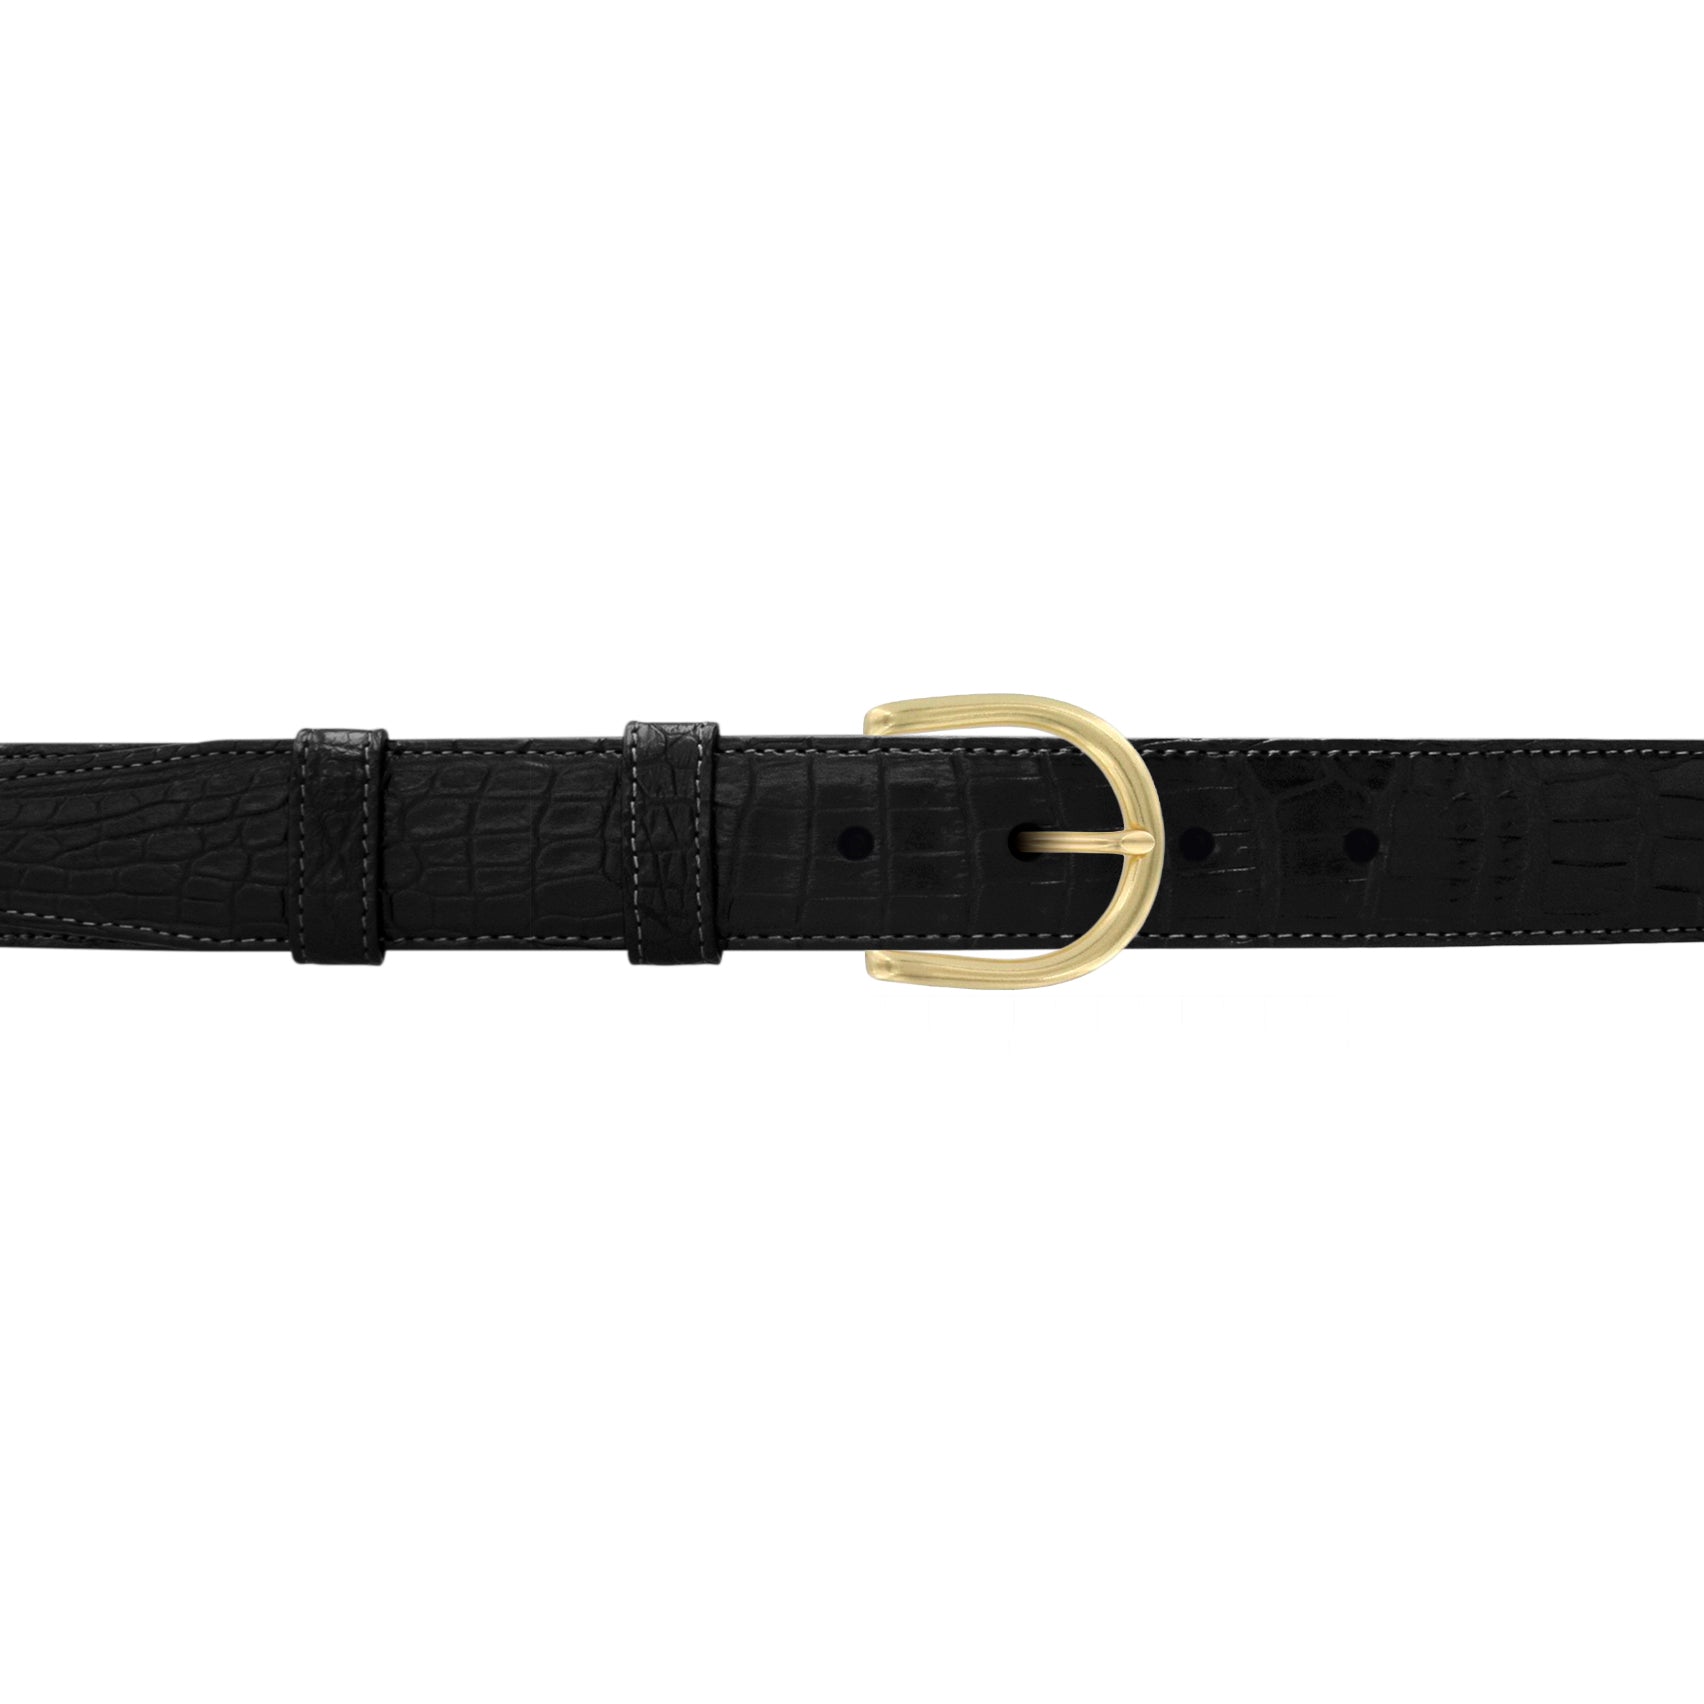 1" Raven Classic Belt with Denver Casual Buckle in Brass